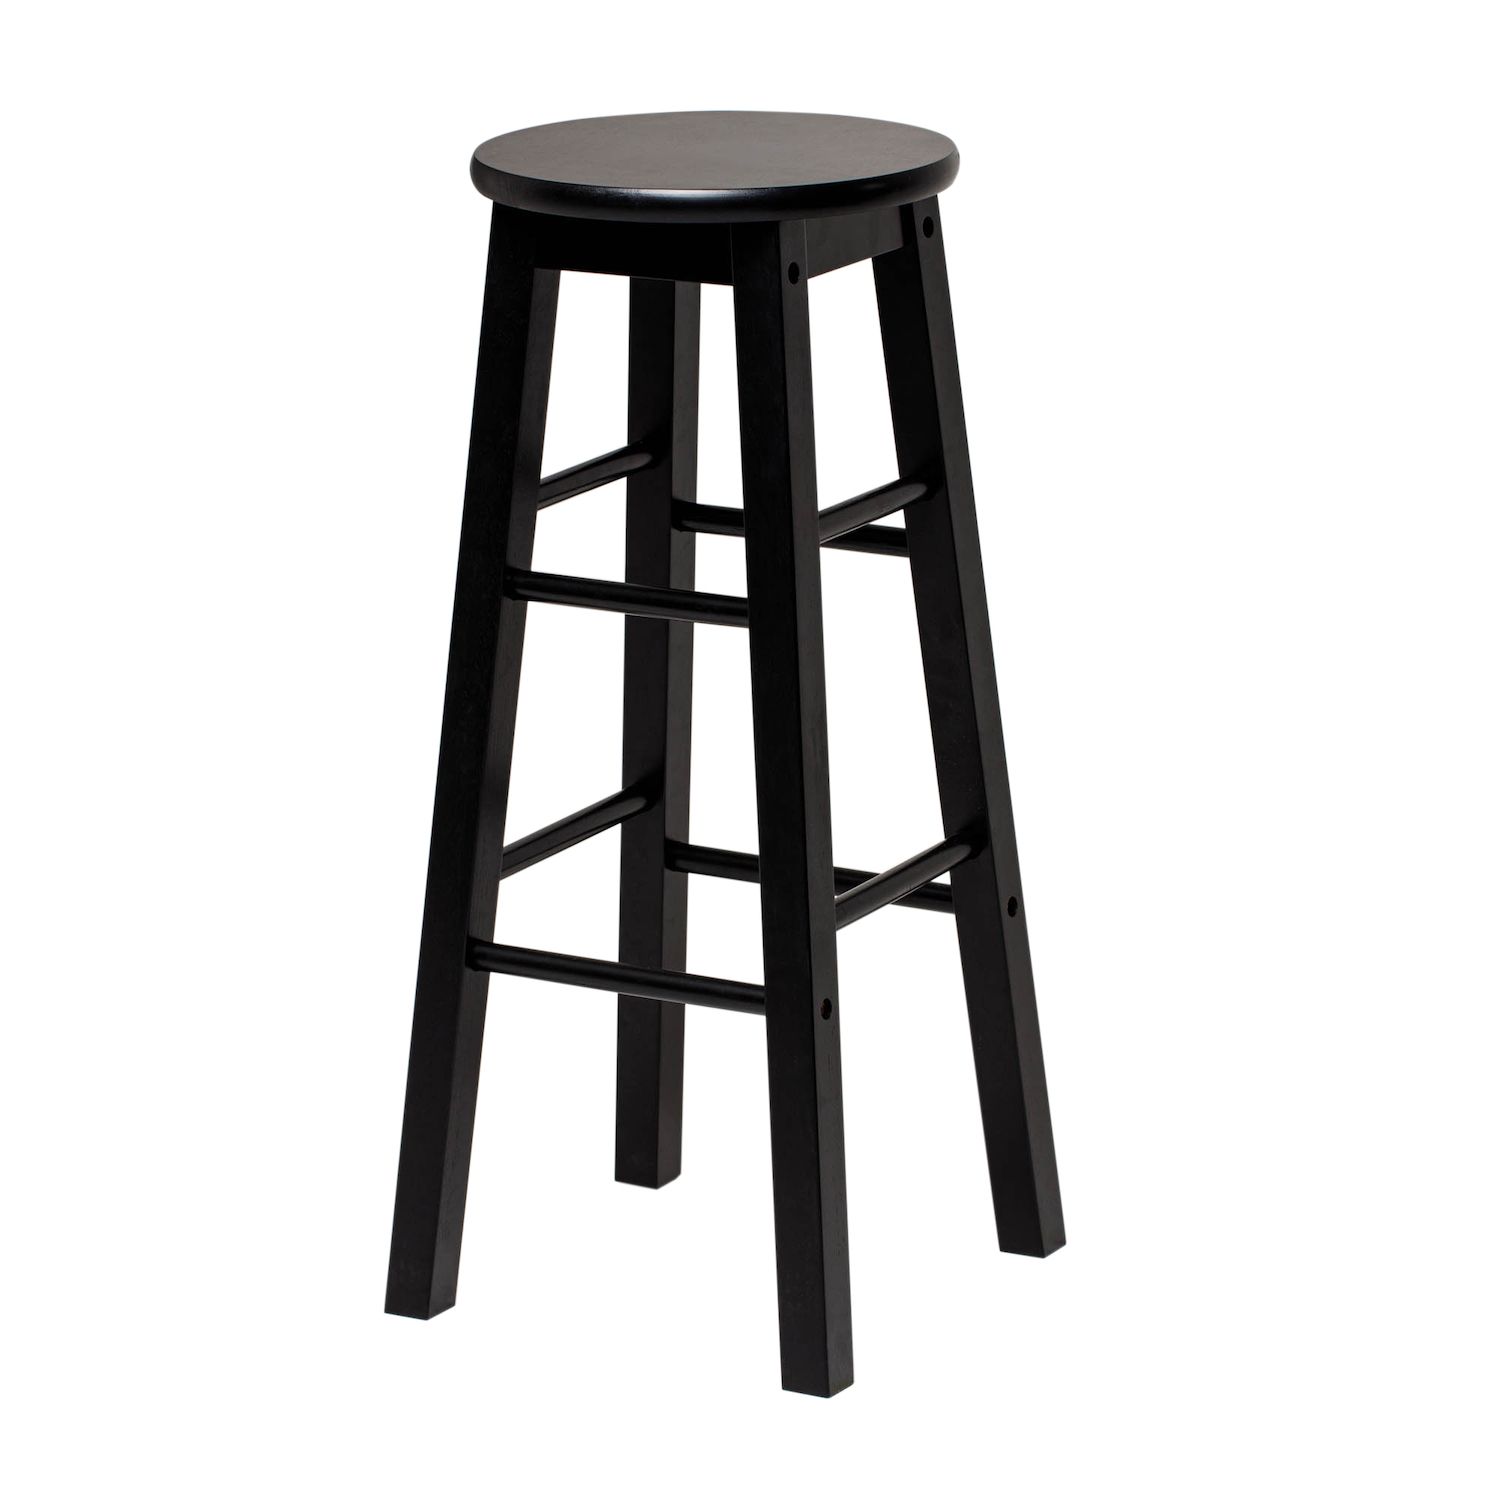 Image for Homestead Solid Wood Backless Mavka 29" Bar Stool with Round Seat, Black at Kohl's.